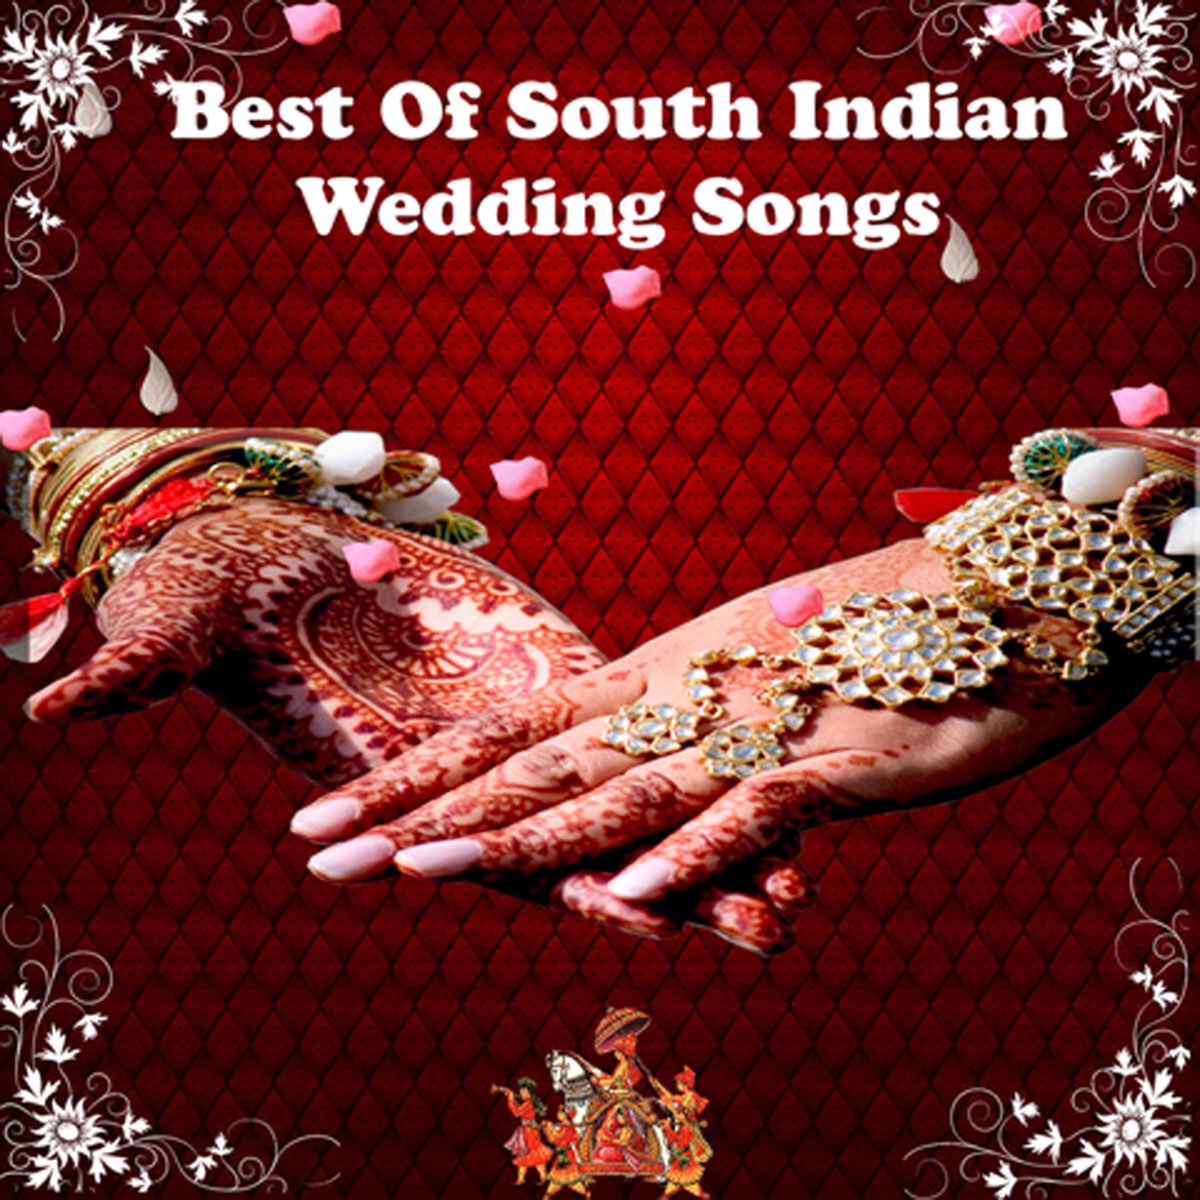 ‎Best of South Indian Wedding Songs by K S G Somanathan, Chaarulatha